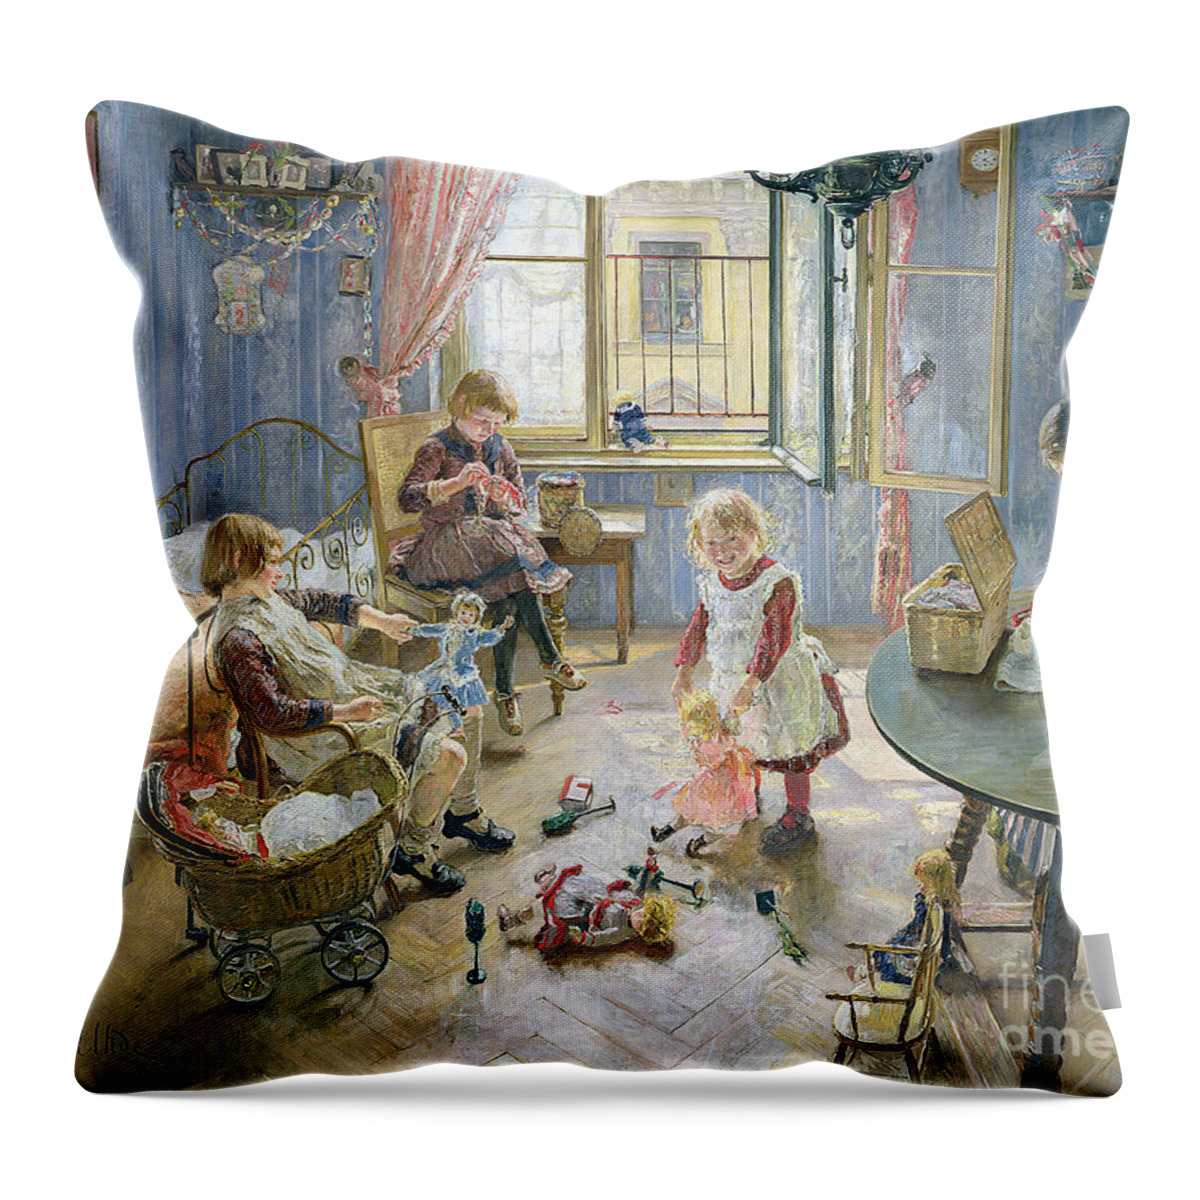 The Throw Pillow featuring the painting The Nursery by Fritz von Uhde